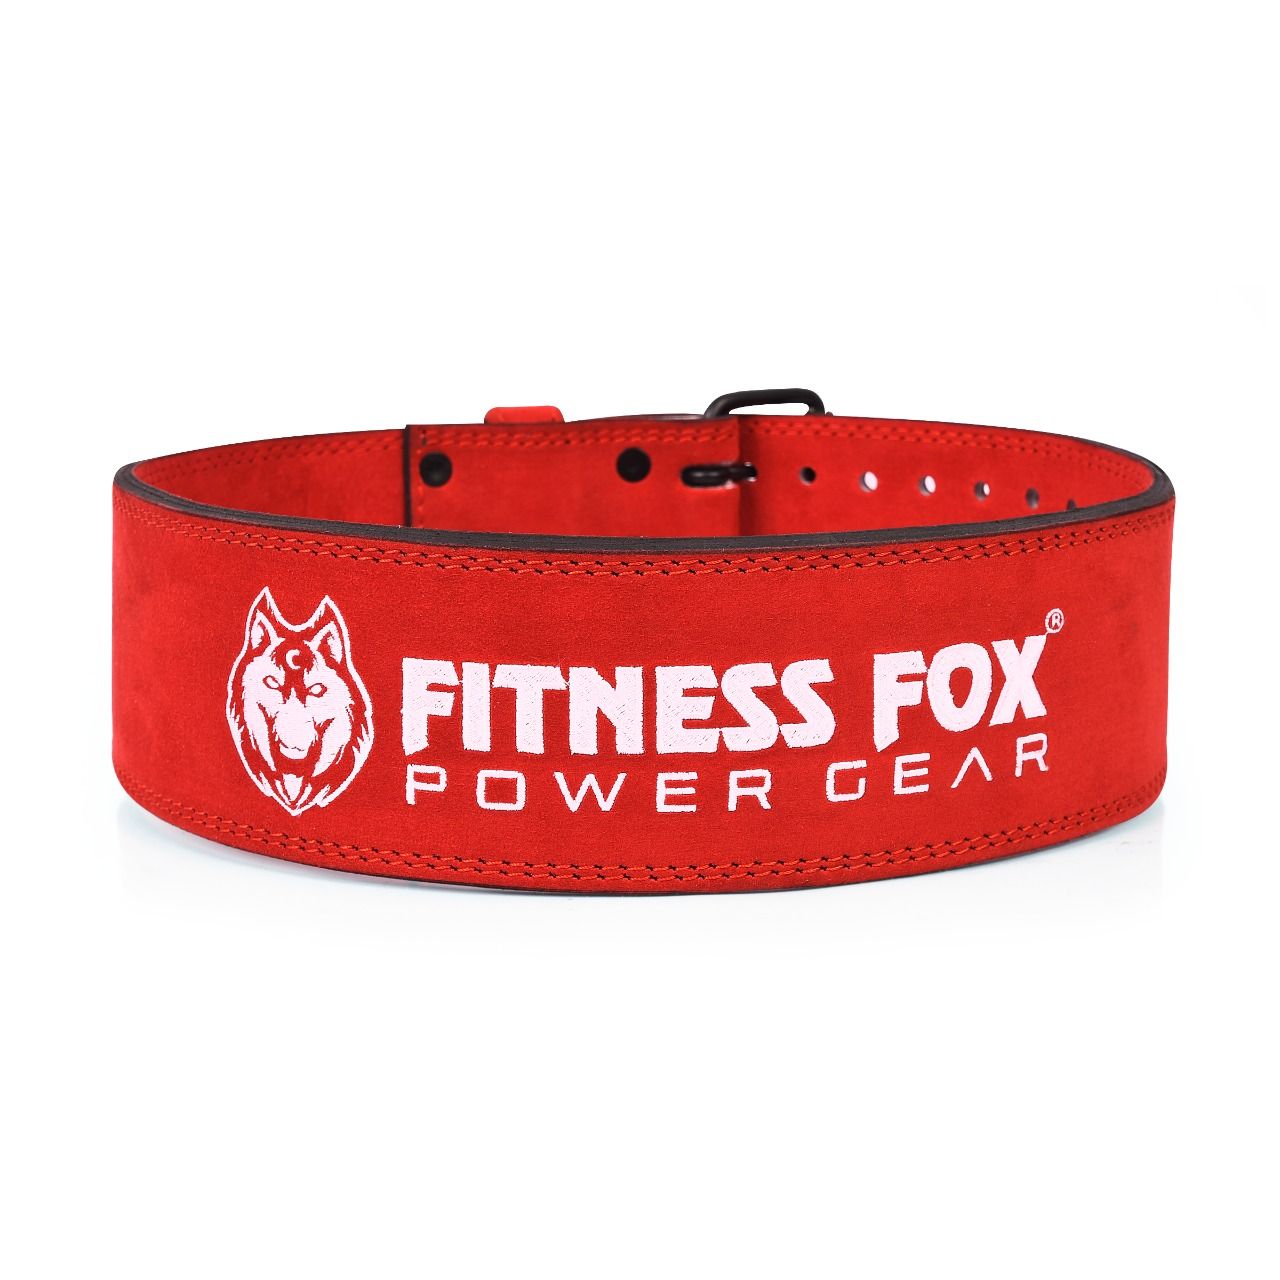 FITNESS FOX Single Prong 10MM Weightlifting-Powerlifting Belt (Red)